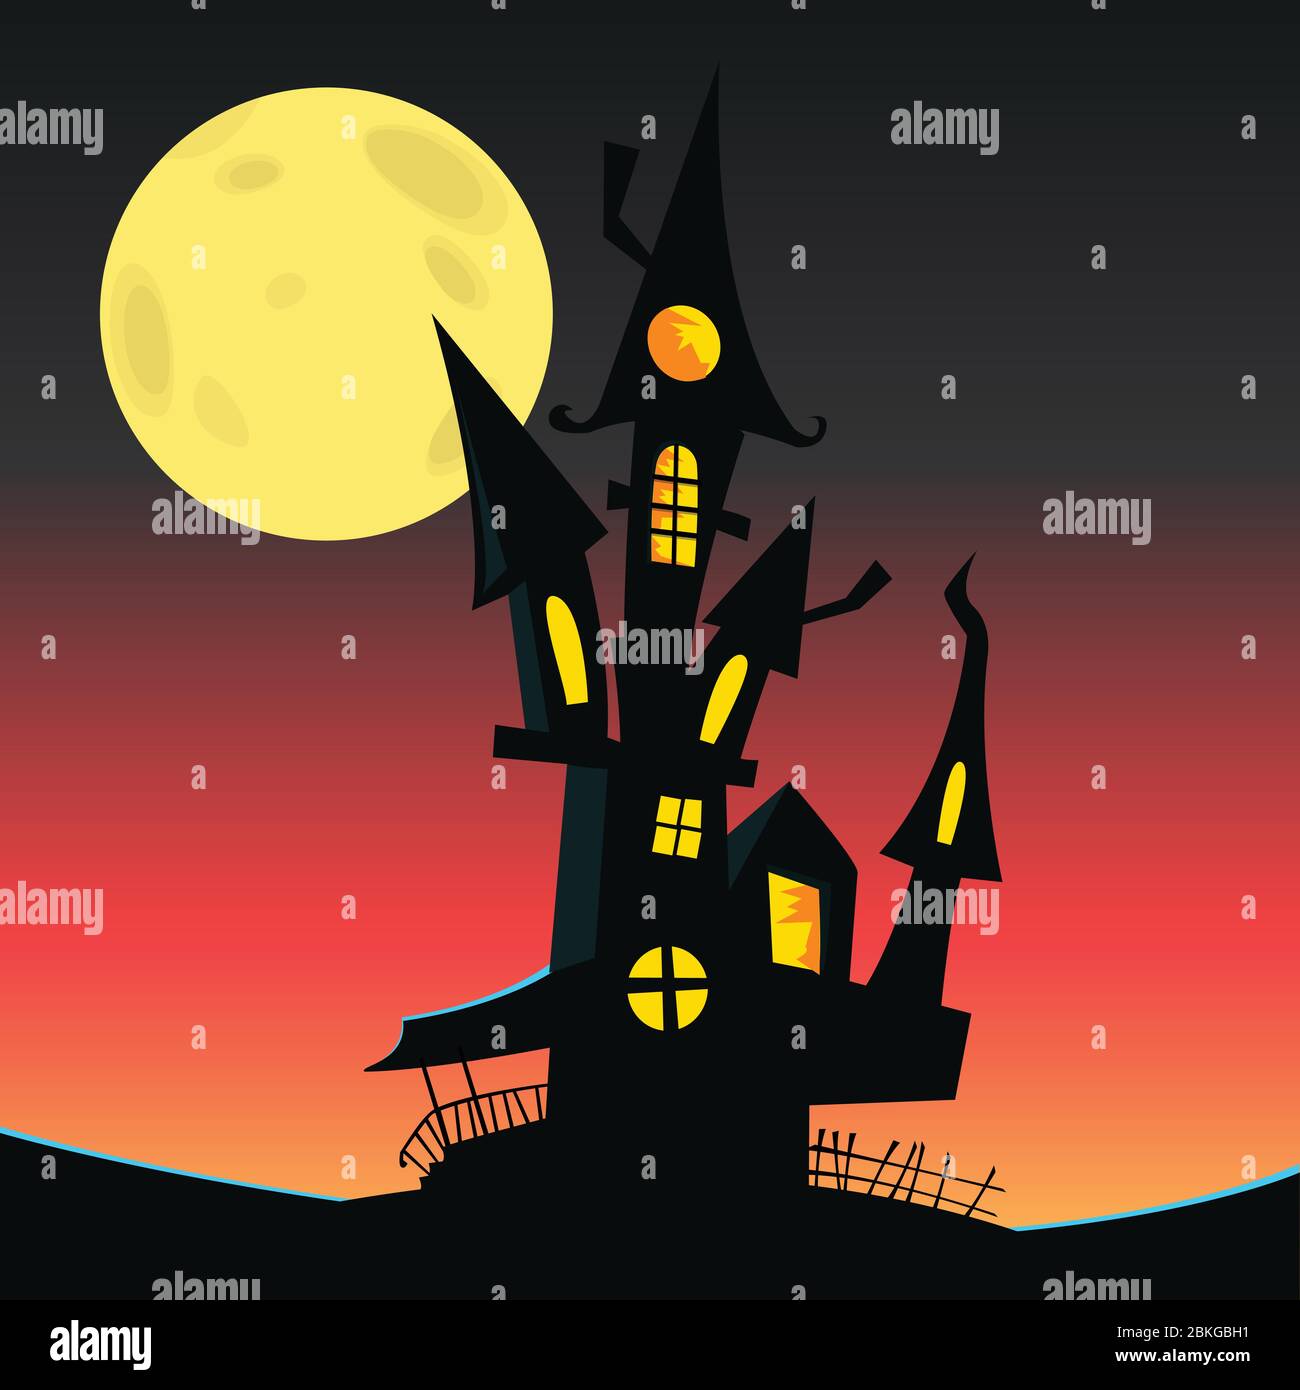 Scary haunted house. Halloween background illustration Stock Vector ...